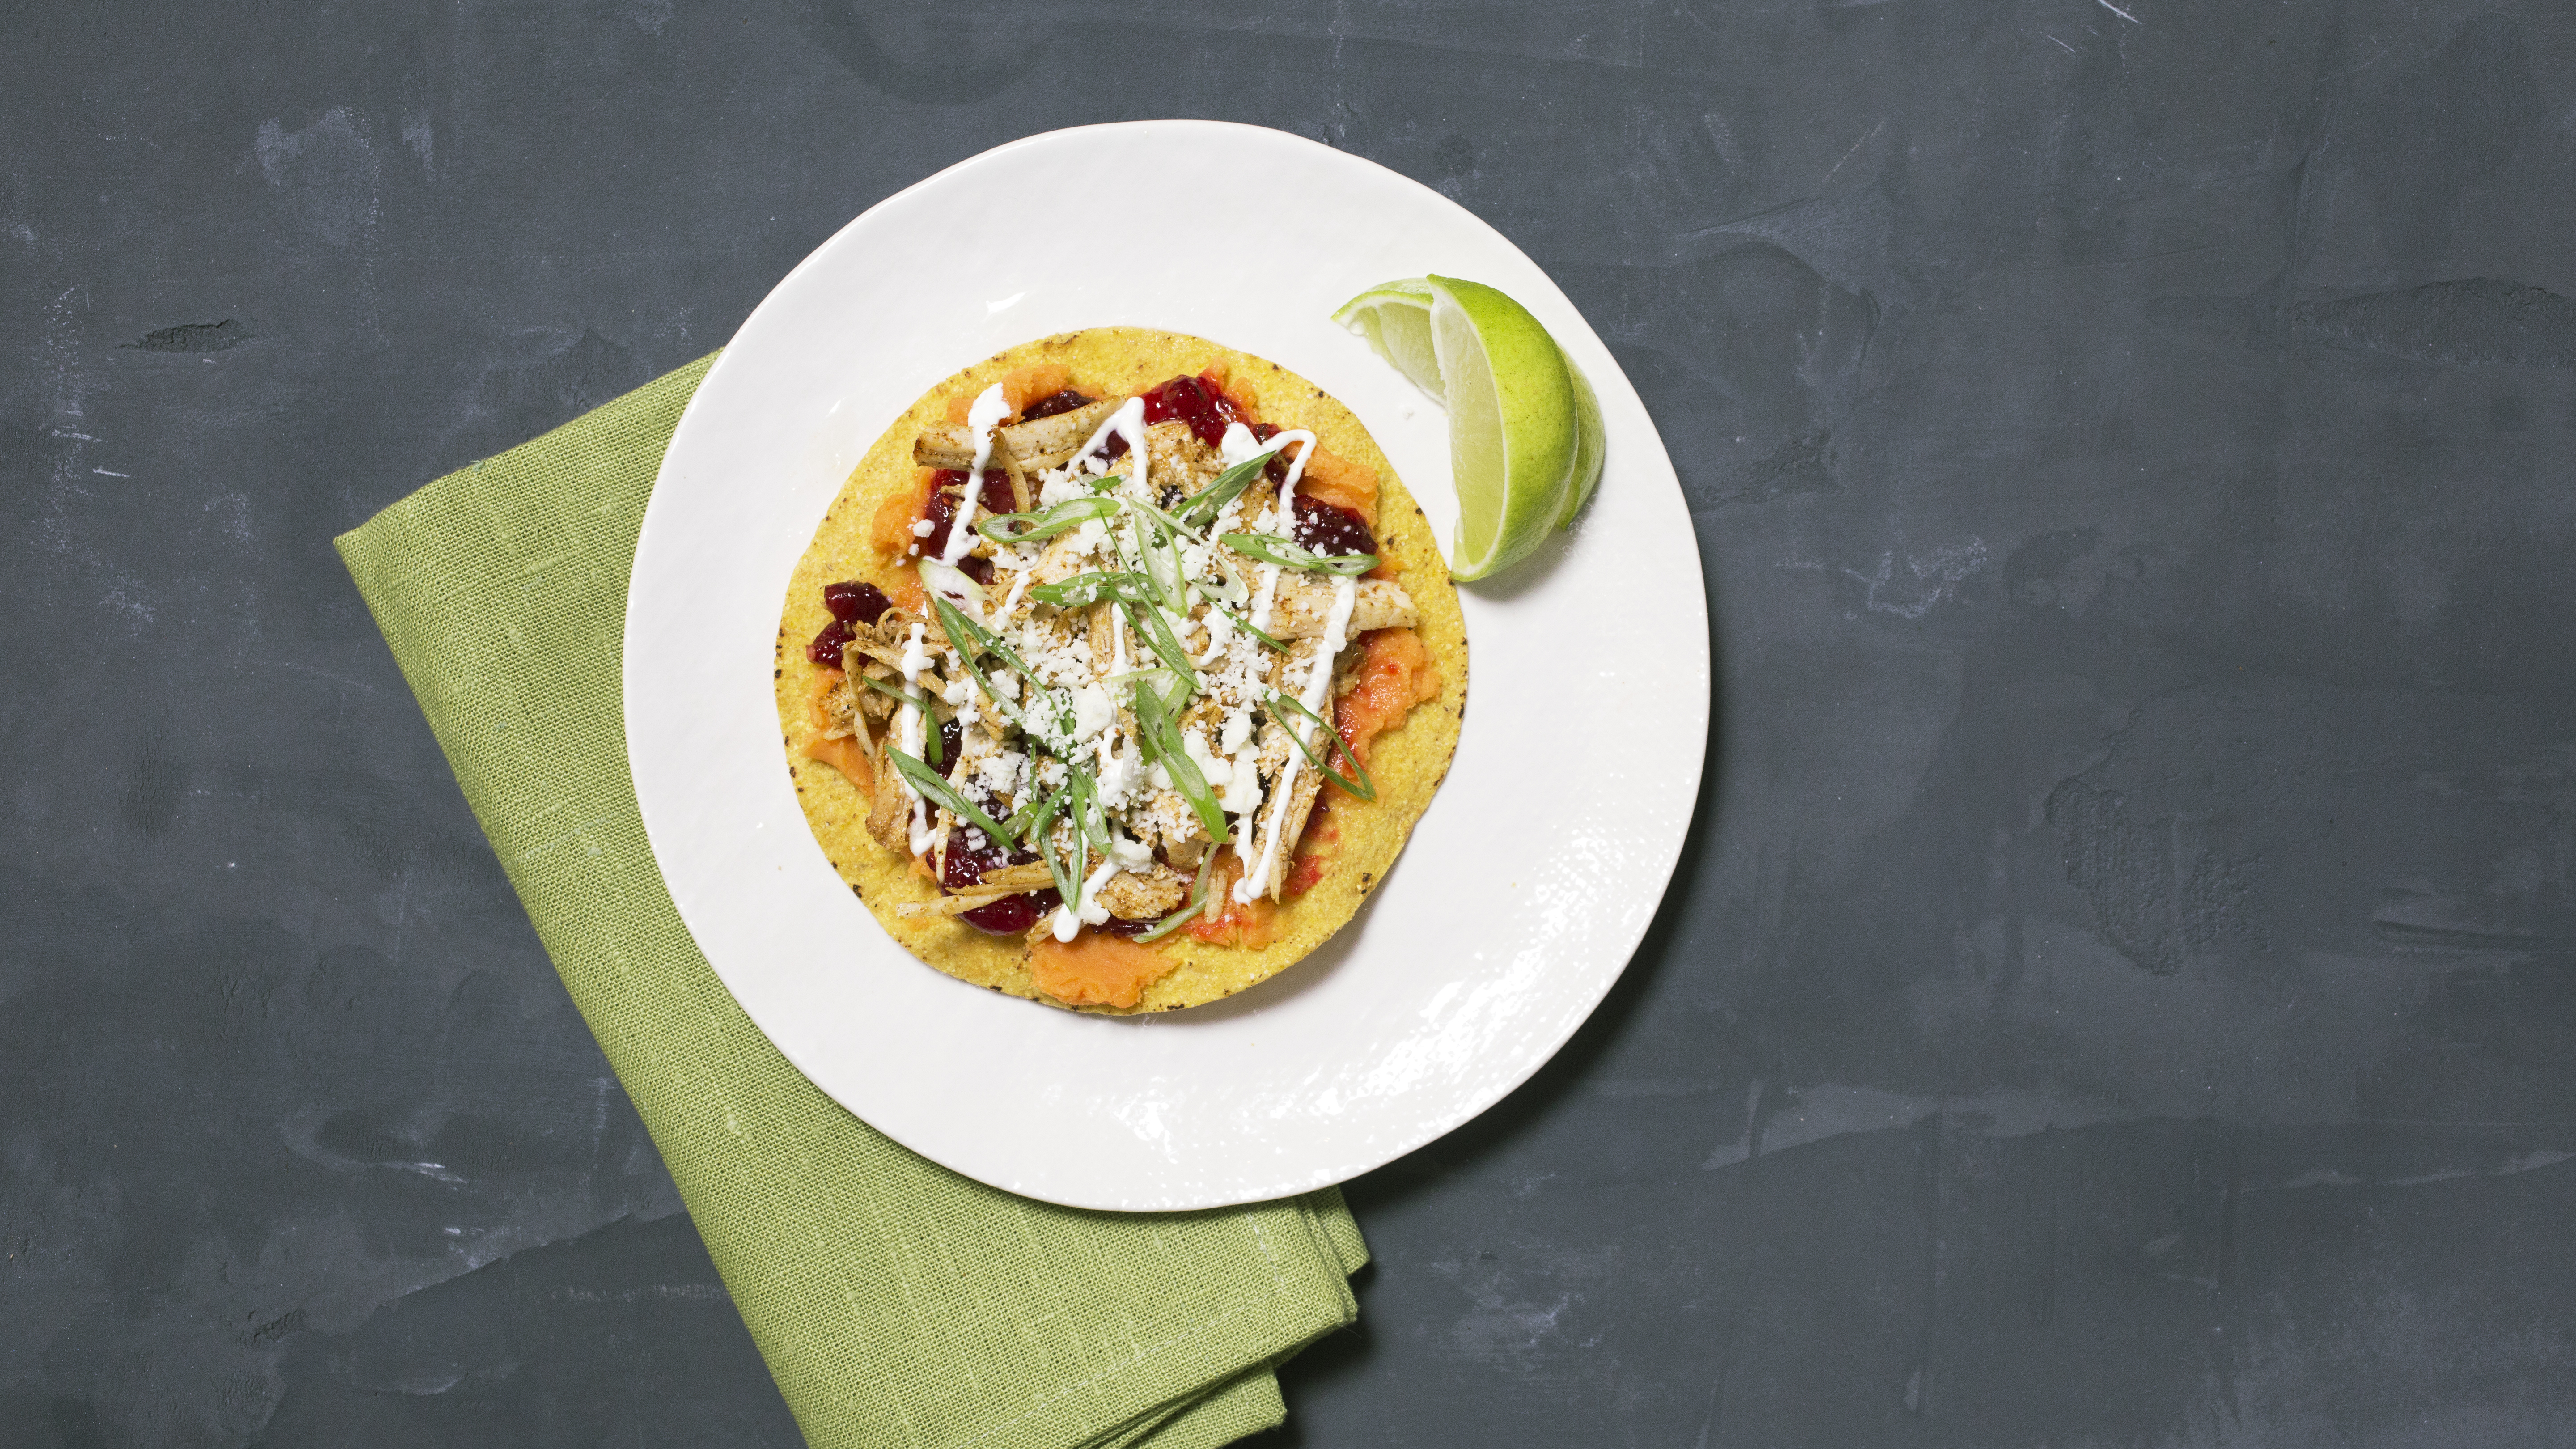 How to Make Thanksgiving Leftovers Tostadas